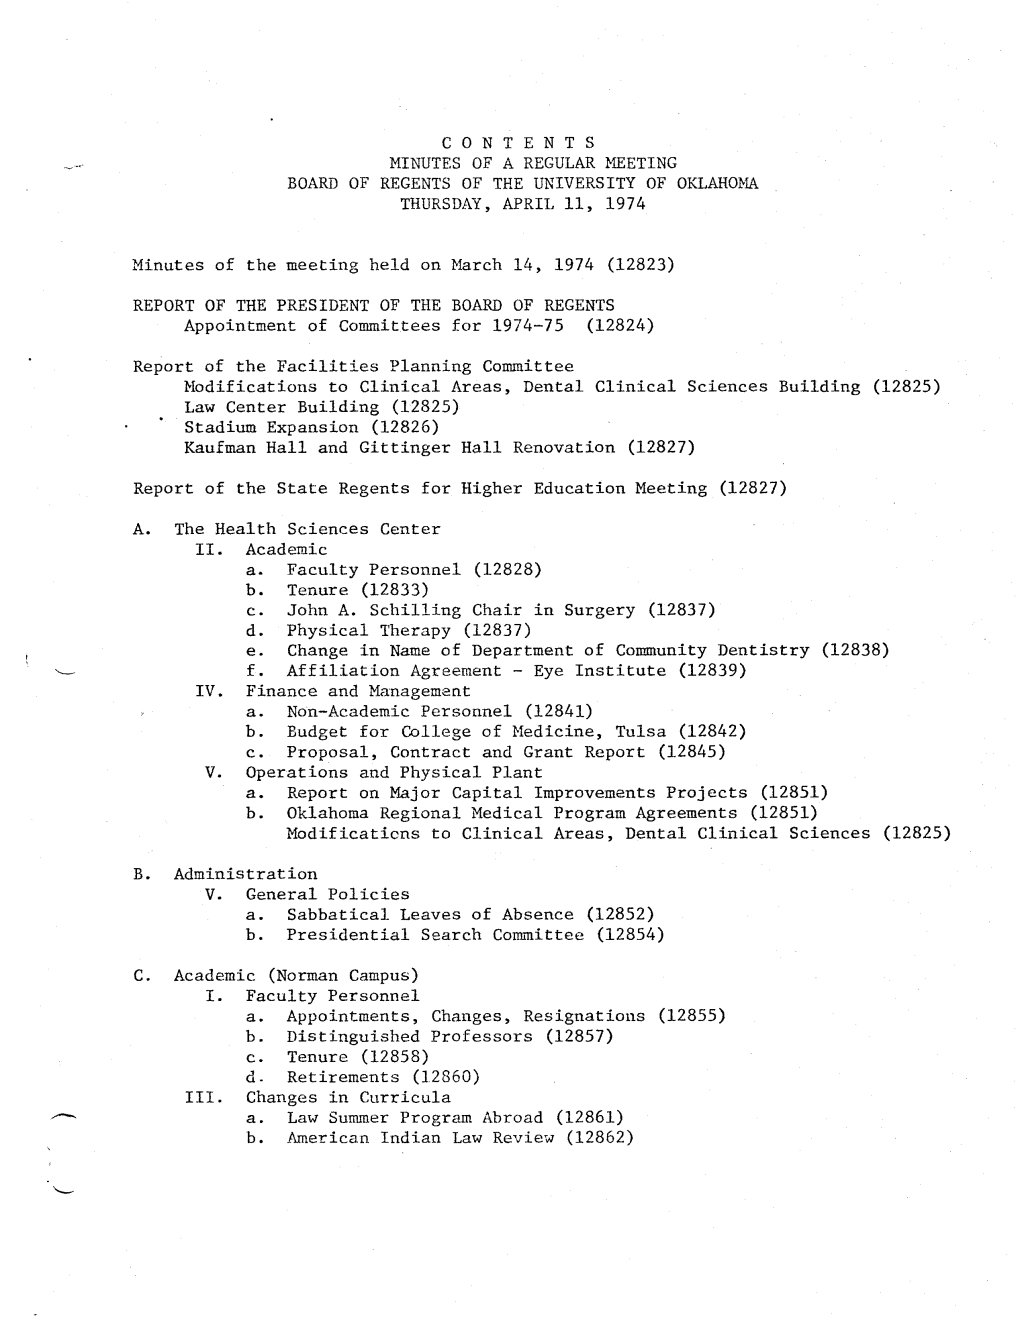 CONTENTS MINUTES of a REGULAR MEETING BOARD of REGENTS of the UNIVERSITY of OKLAHOMA THURSDAY, APRIL 11, 1974 Minutes of The